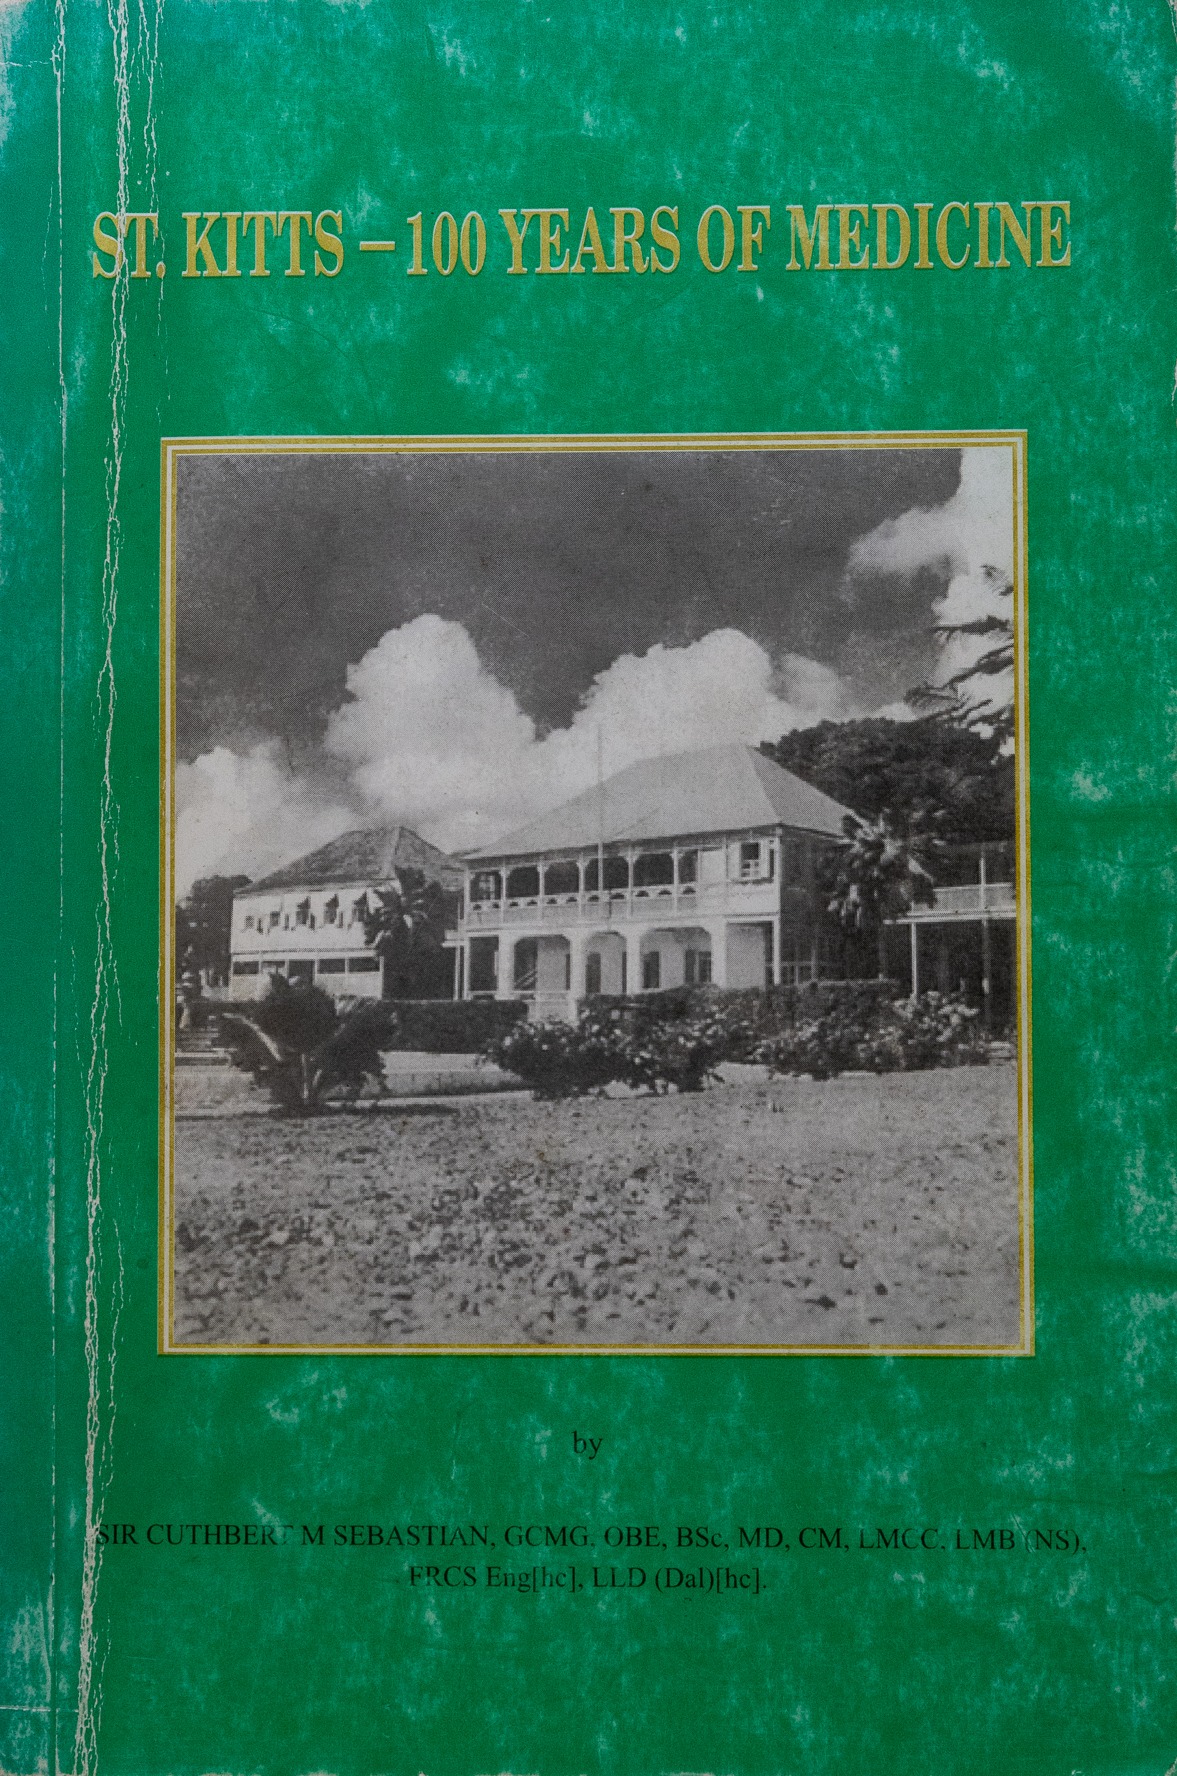 St Kitts- 100 Years of Medicine